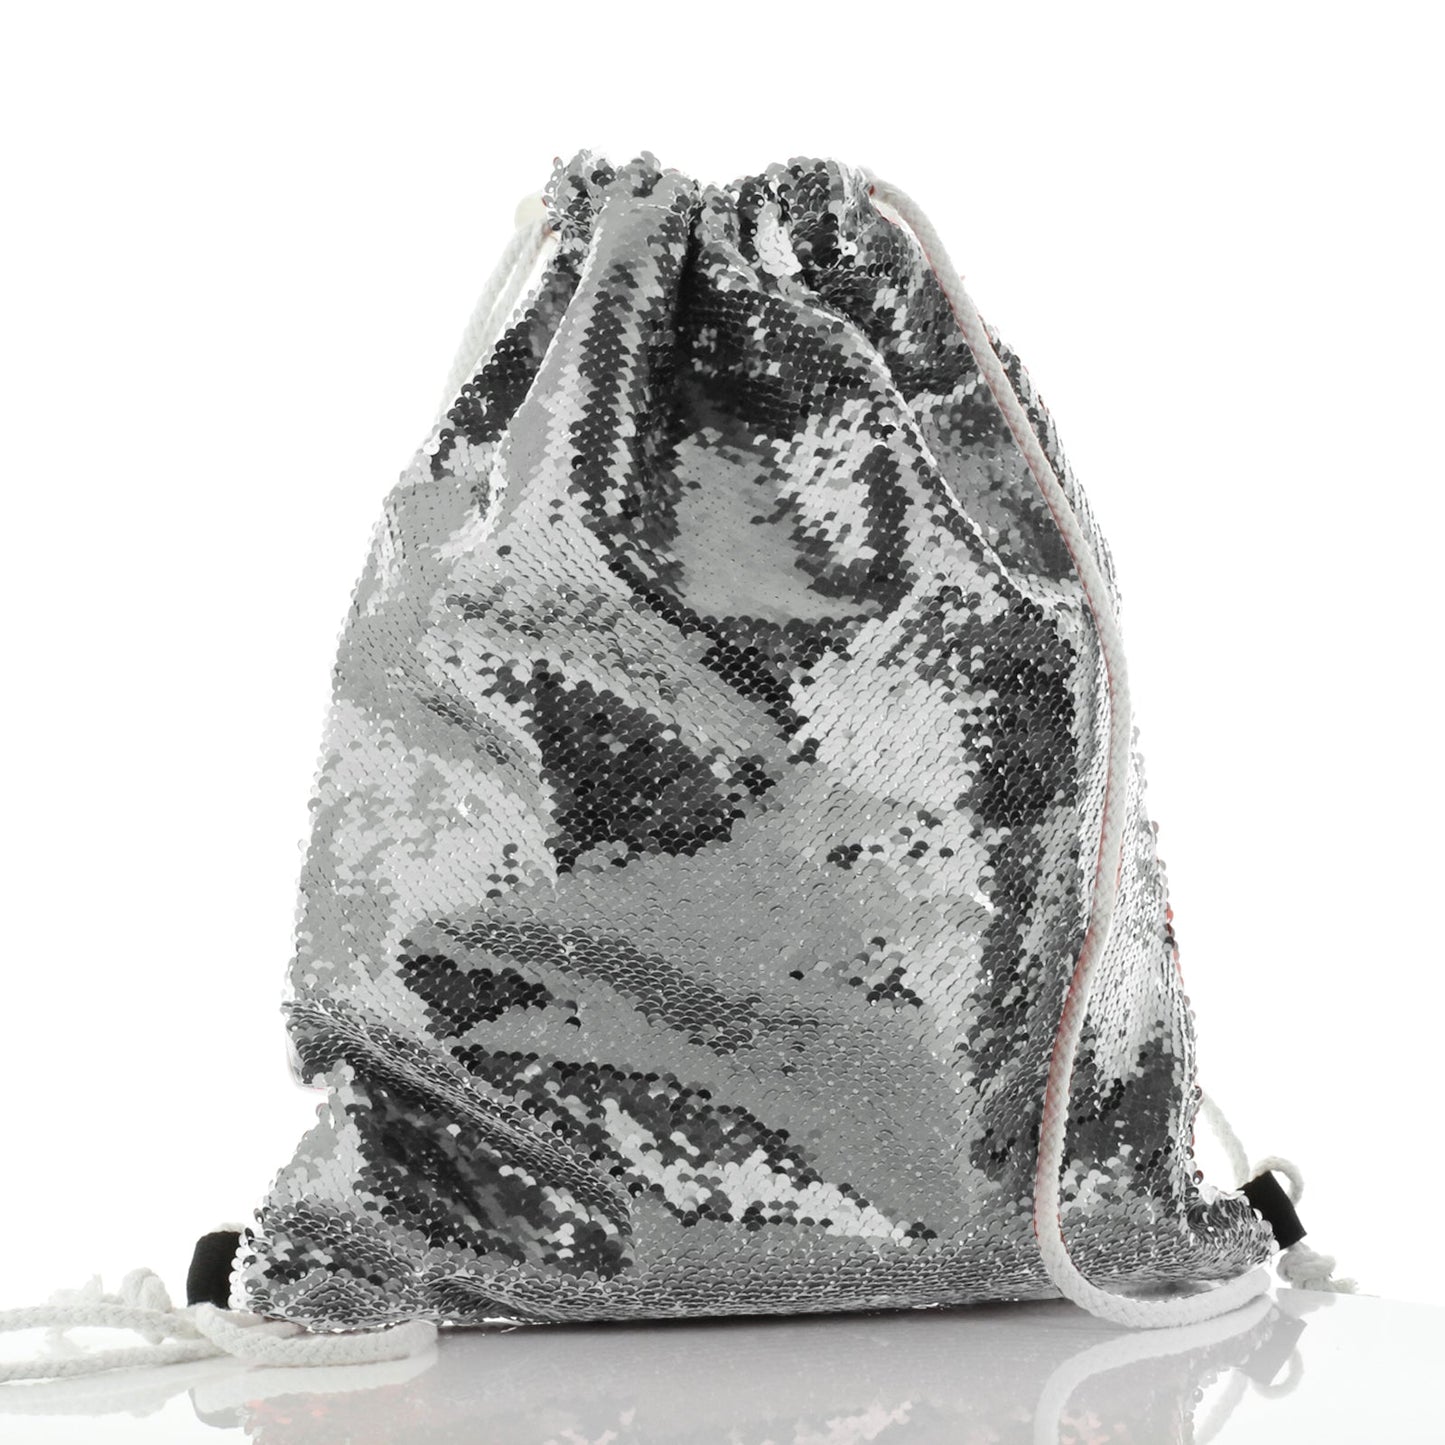 Personalised Sequin Drawstring Backpack with Welcoming Text and Relaxing Mum and Baby Giraffes